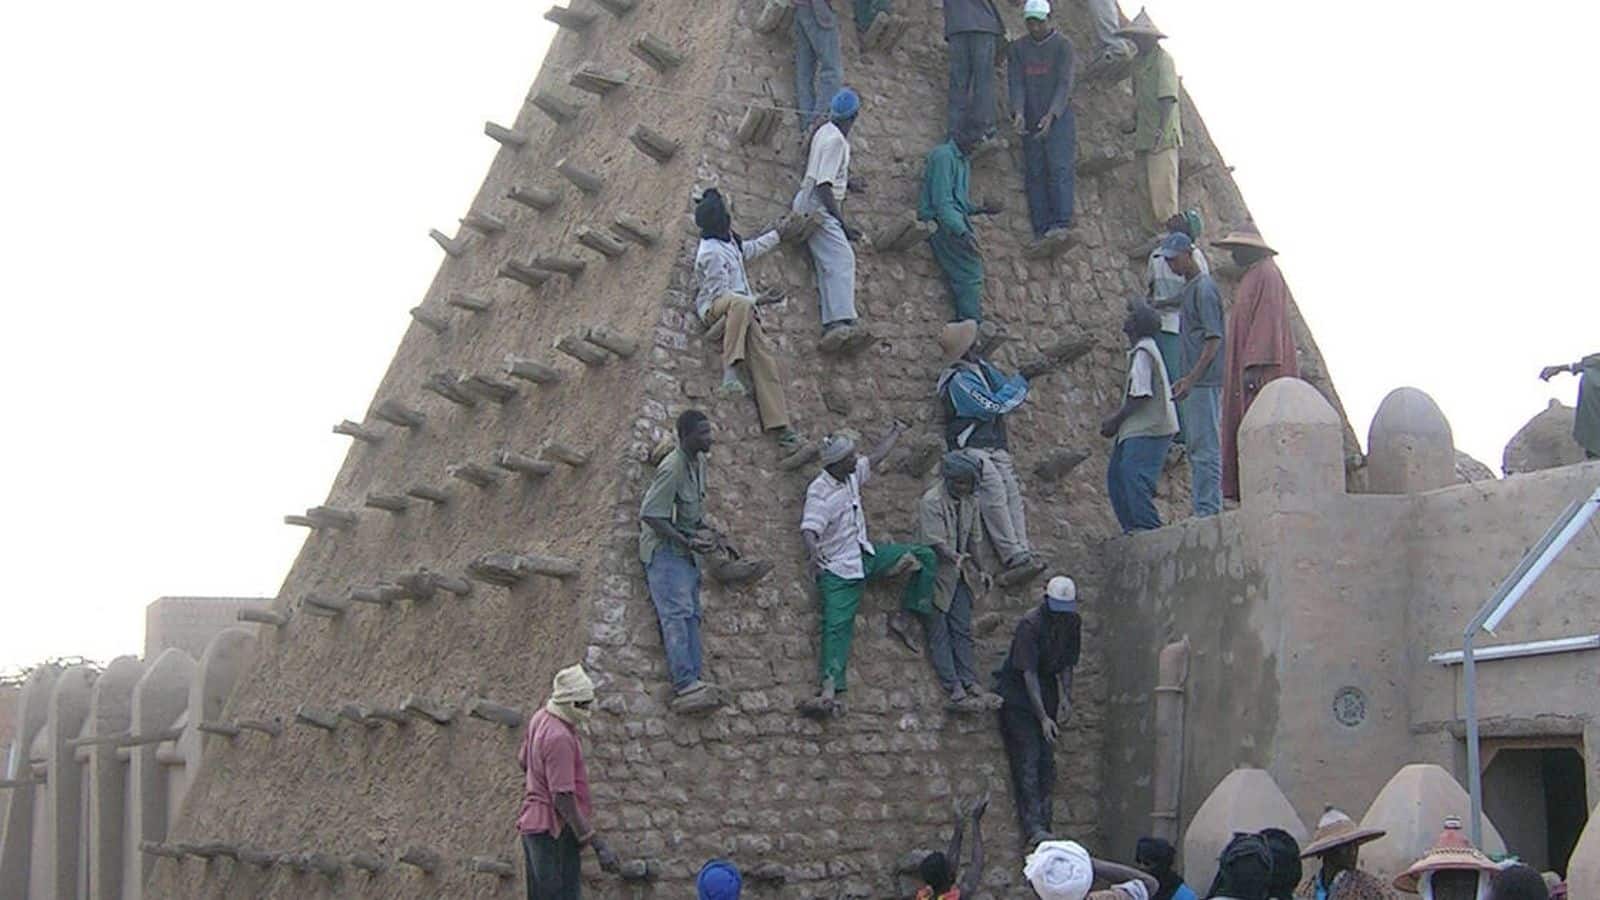 Take a journey through time and culture in Timbuktu, Mali